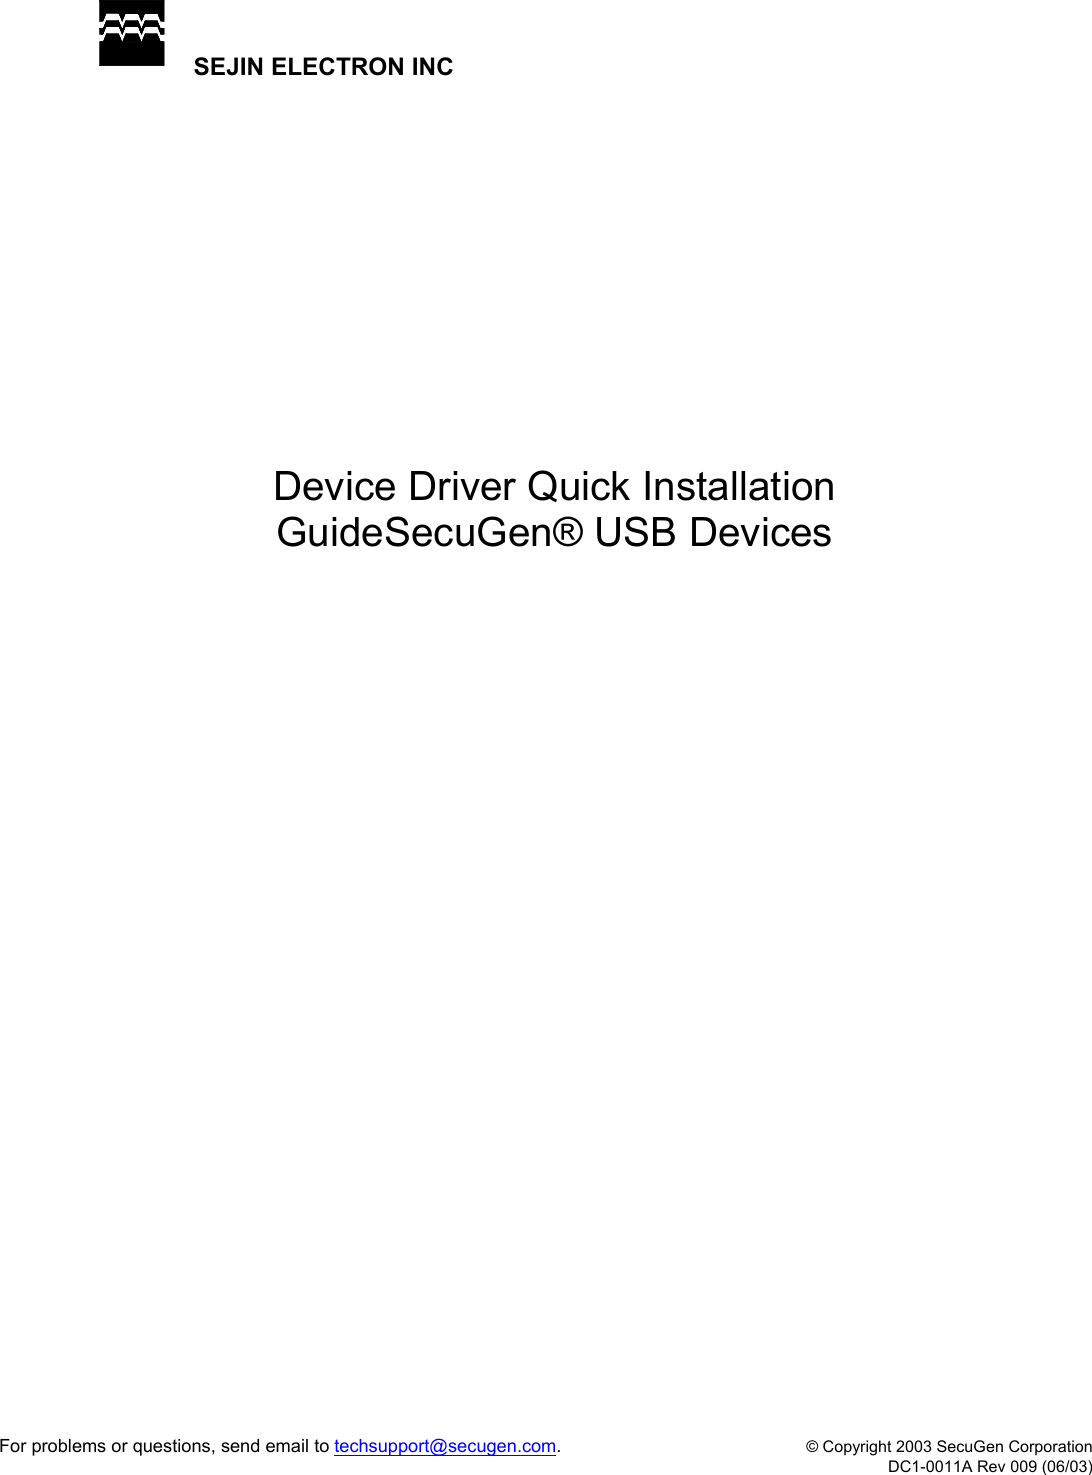 For problems or questions, send email to techsupport@secugen.com.  © Copyright 2003 SecuGen Corporation   DC1-0011A Rev 009 (06/03) SEJIN ELECTRON INC             Device Driver Quick Installation GuideSecuGen® USB Devices  